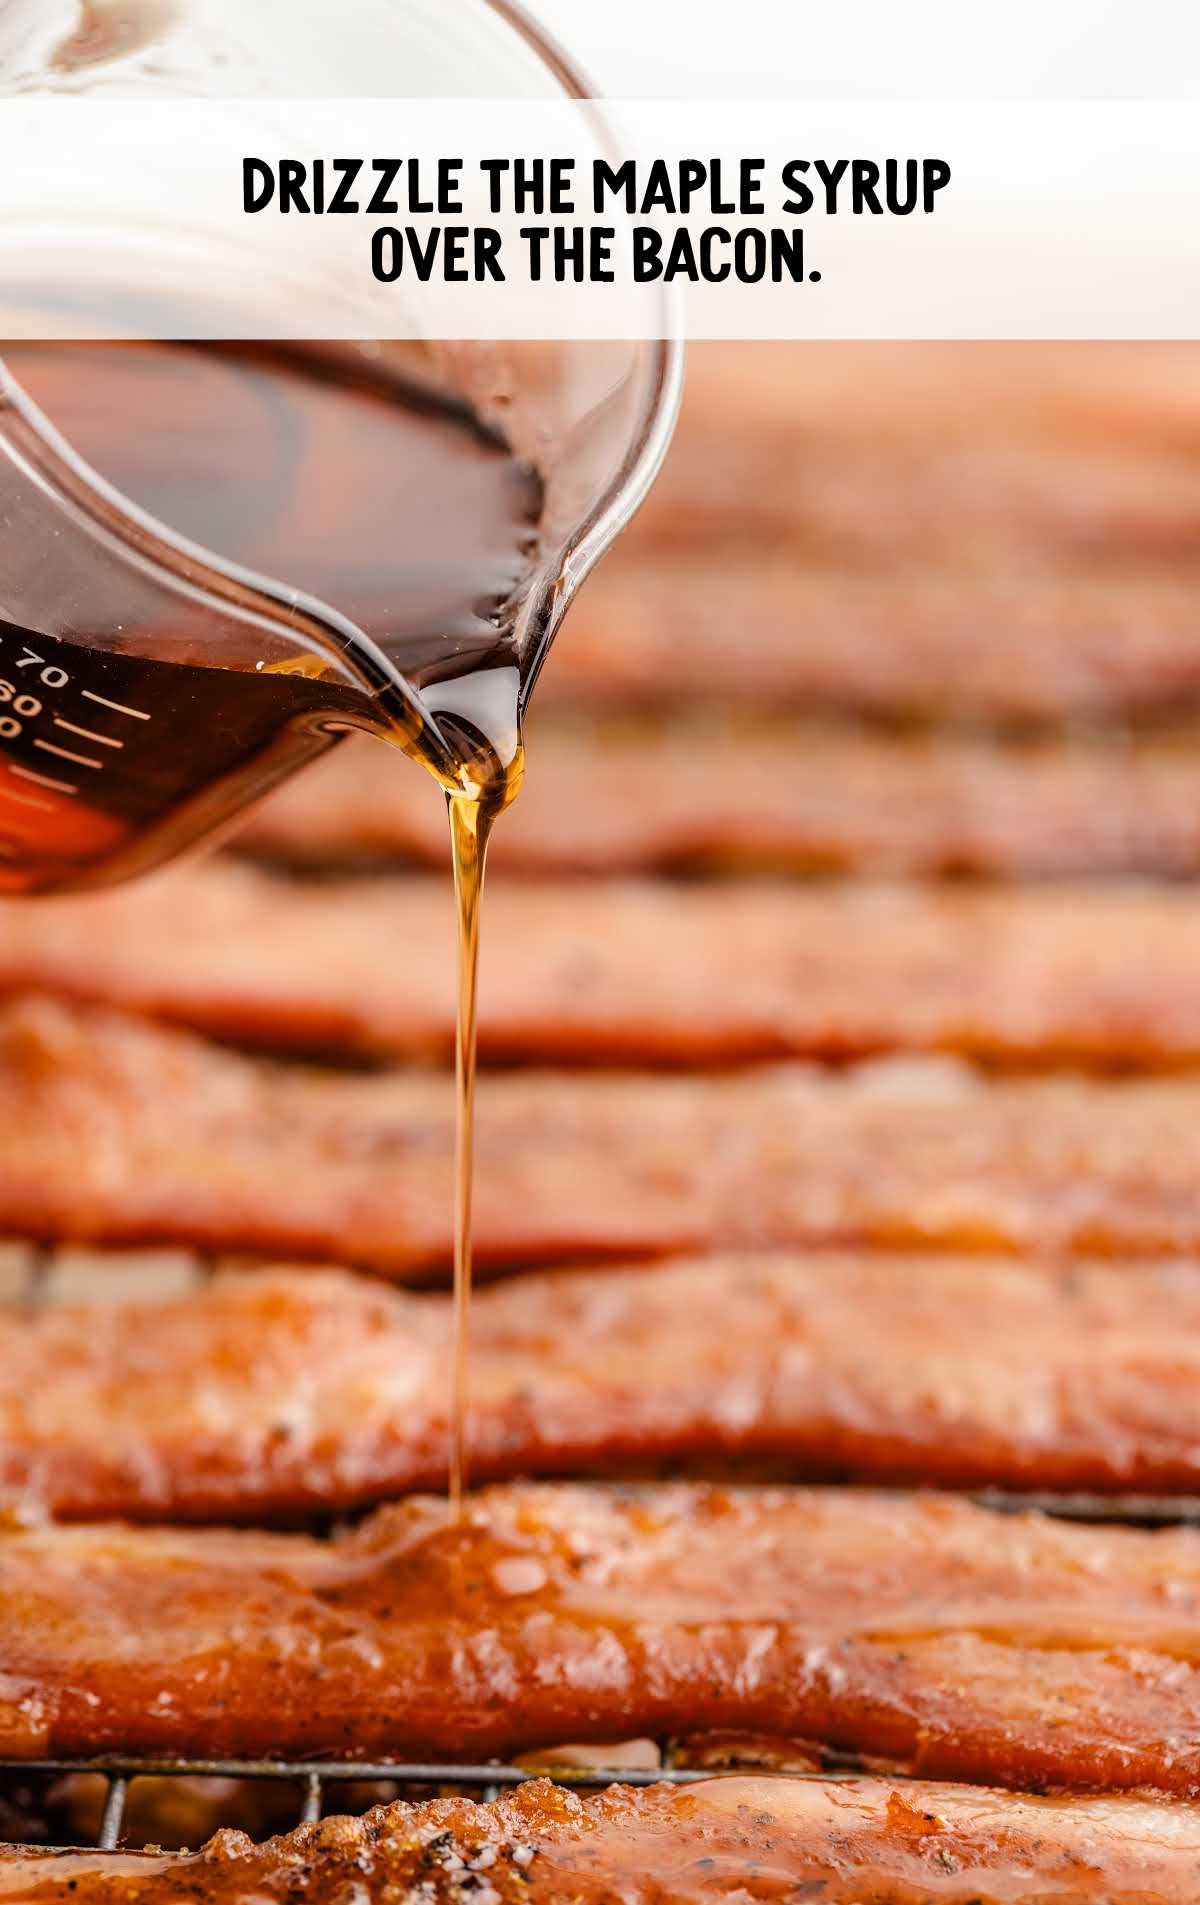 maple syrup drizzled on top of the cooked bacon